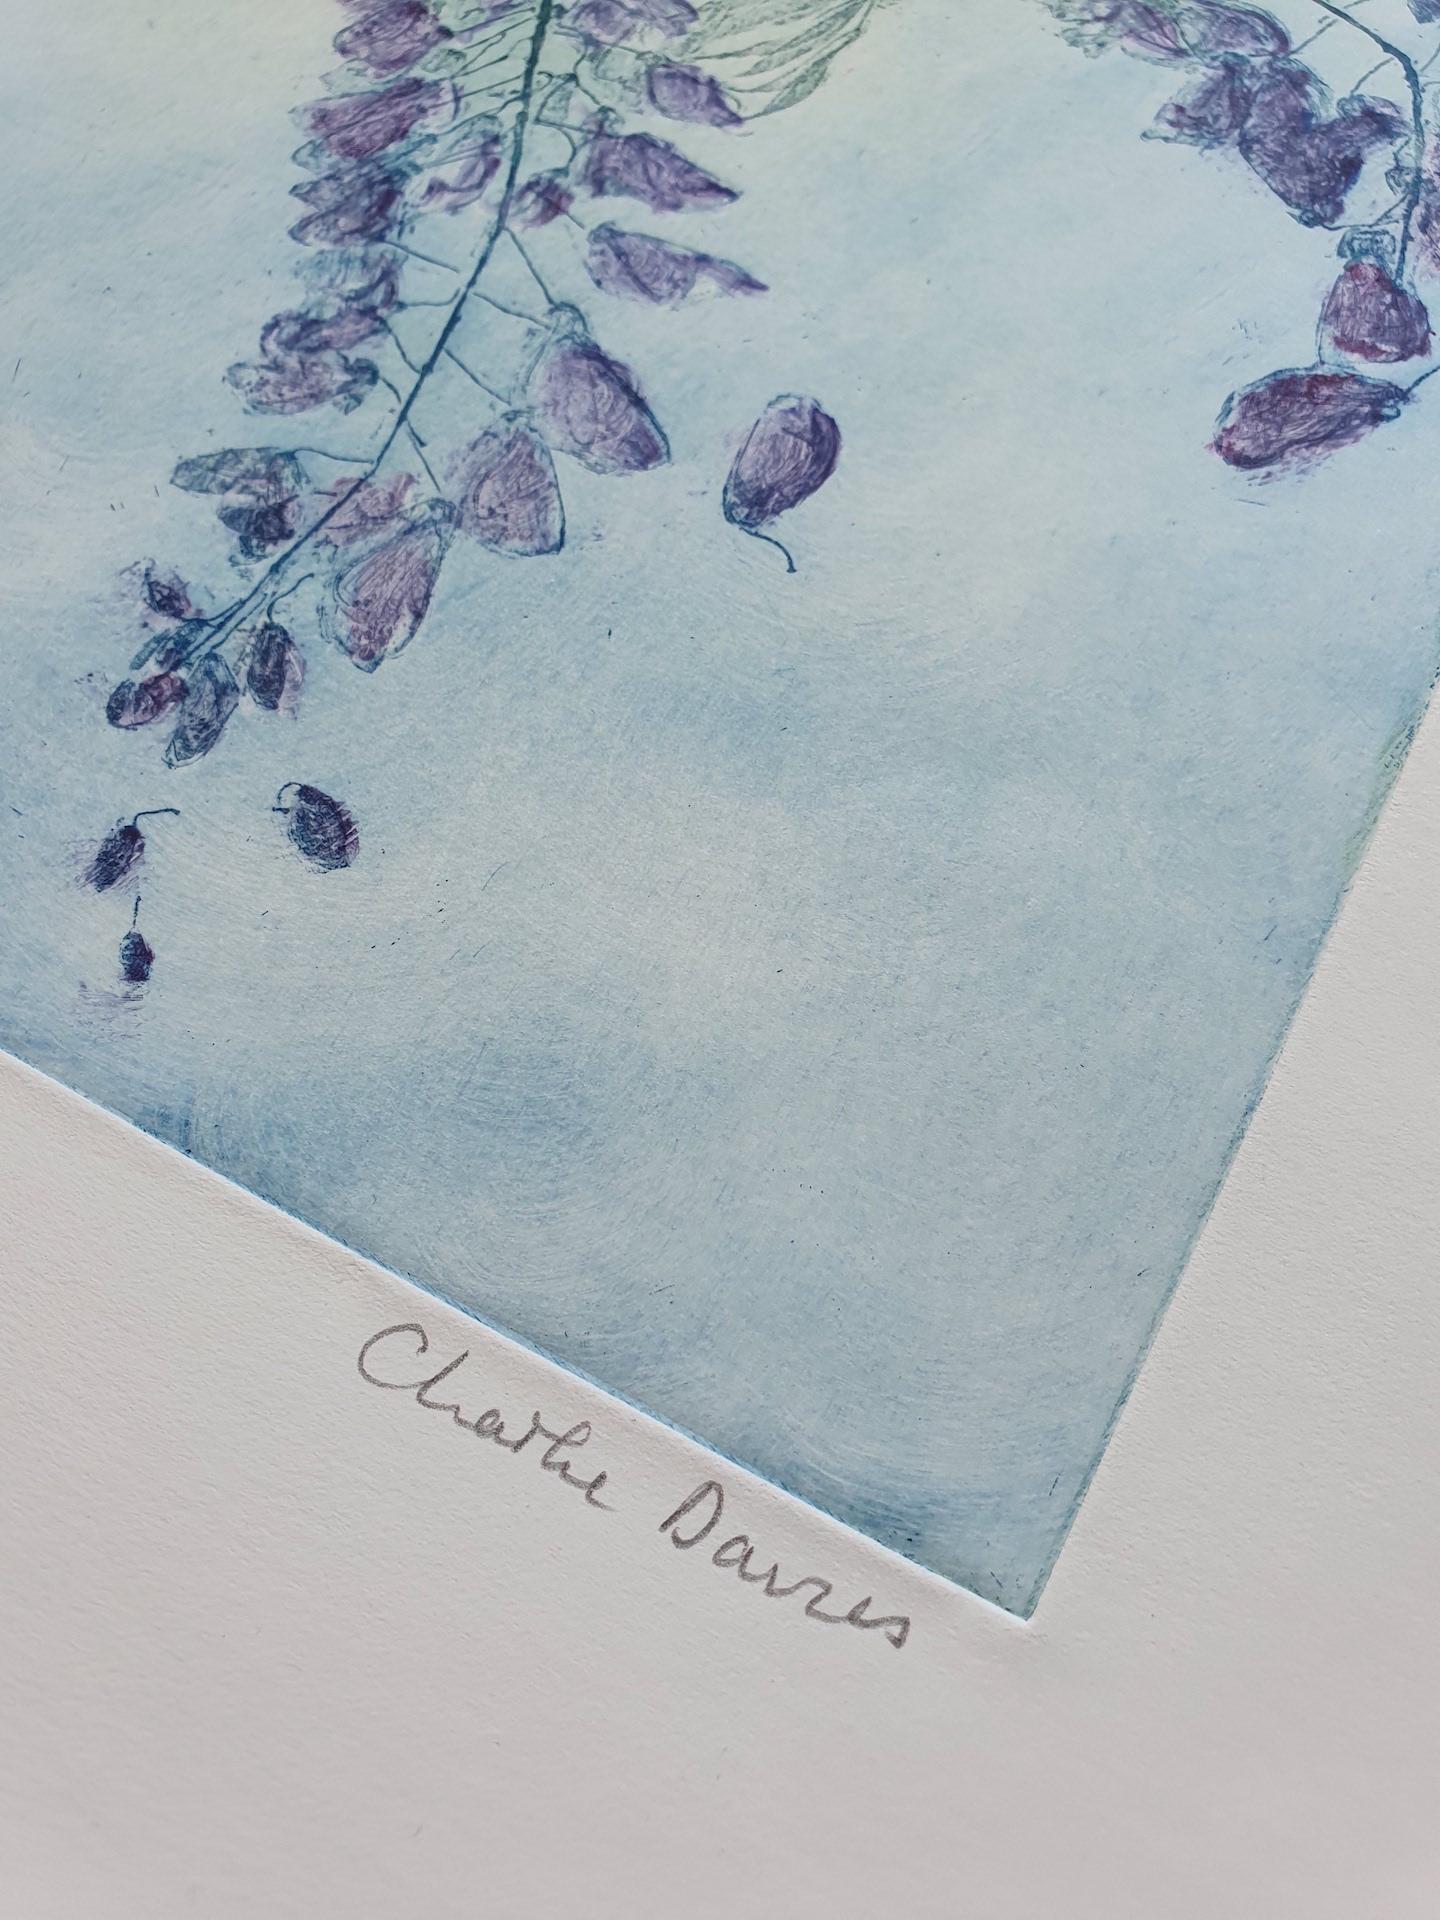 Charlie Davies
Wysteria
Original botanical etching
Soft ground etching on paper
Image Size: 35 cm x 35 cm x 1 cm
Sheet/Canvas Size: 50 cm x 50 cm x 1 cm
Unframed
Free Shipping
Please note that in situ images are purely an indication of how a piece